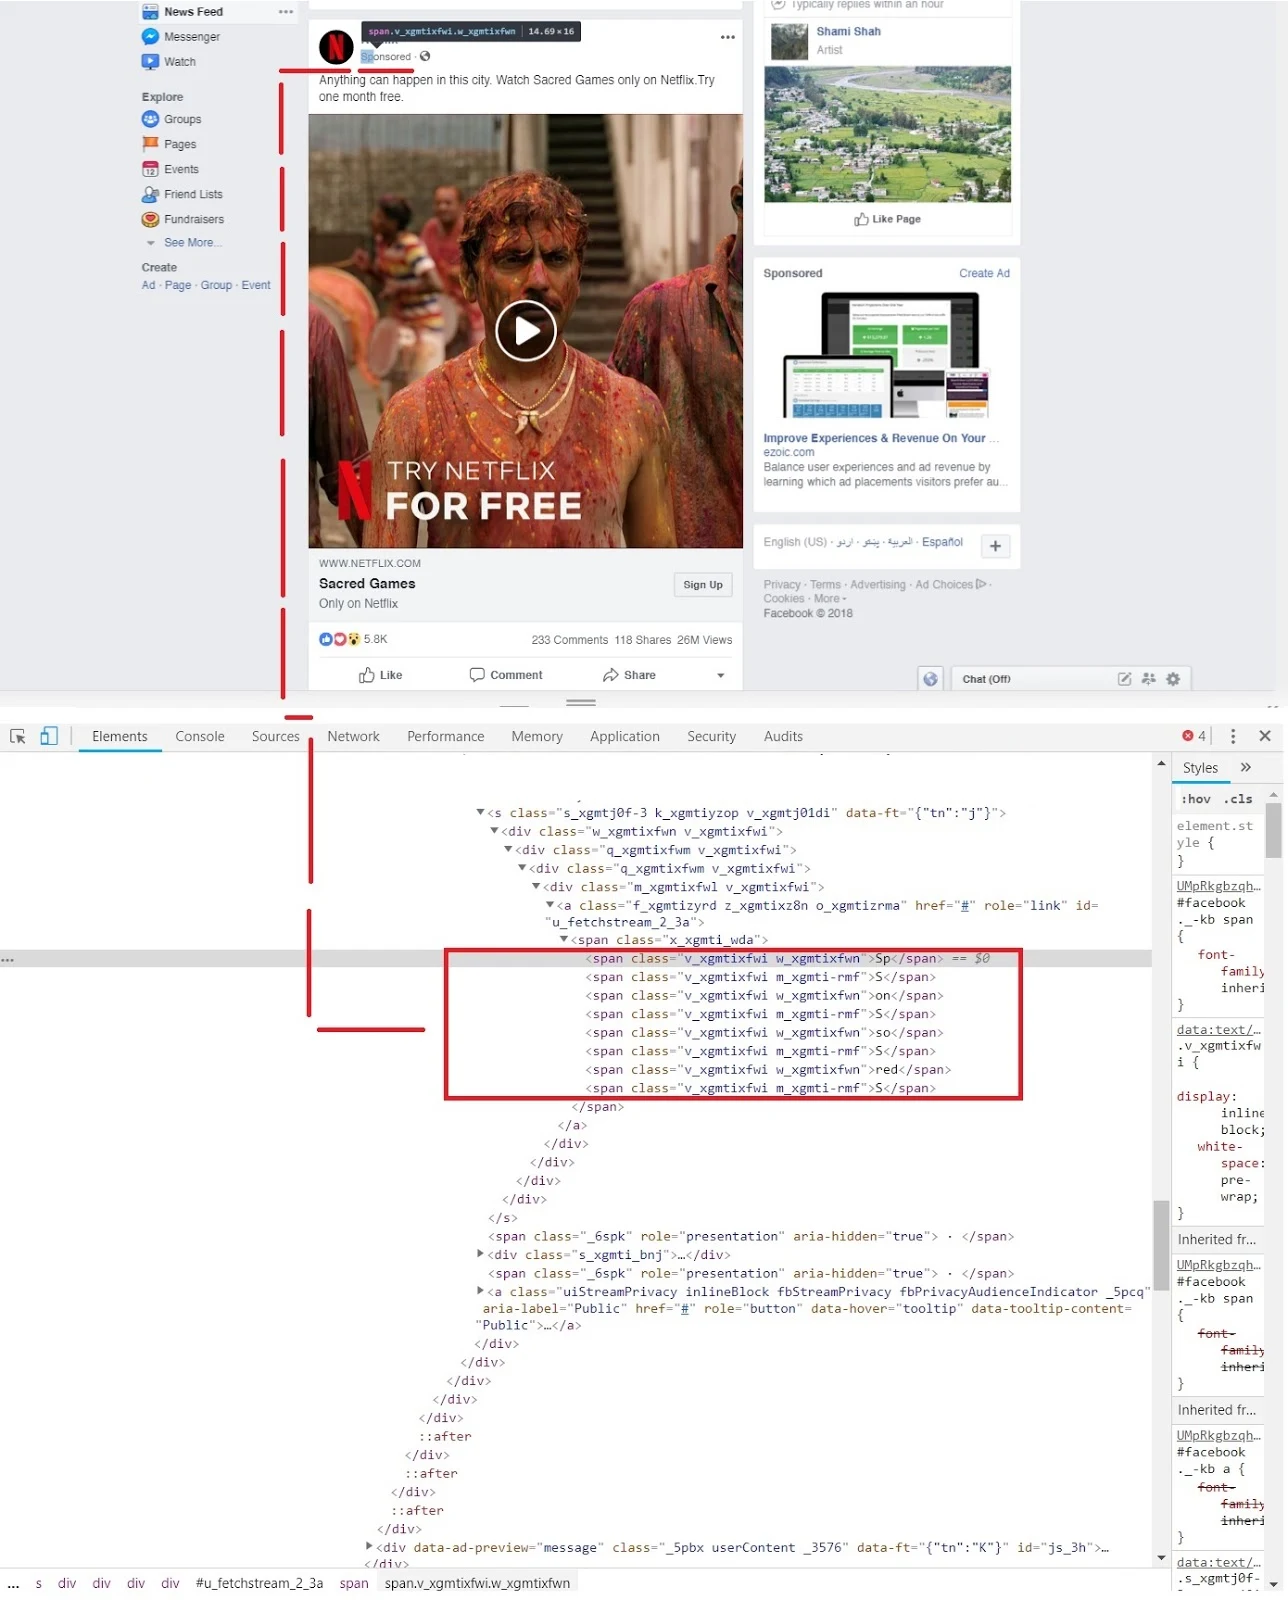 Facebook uses 'divide and rule policy' in its source code to show the ads to users who use ad blockers